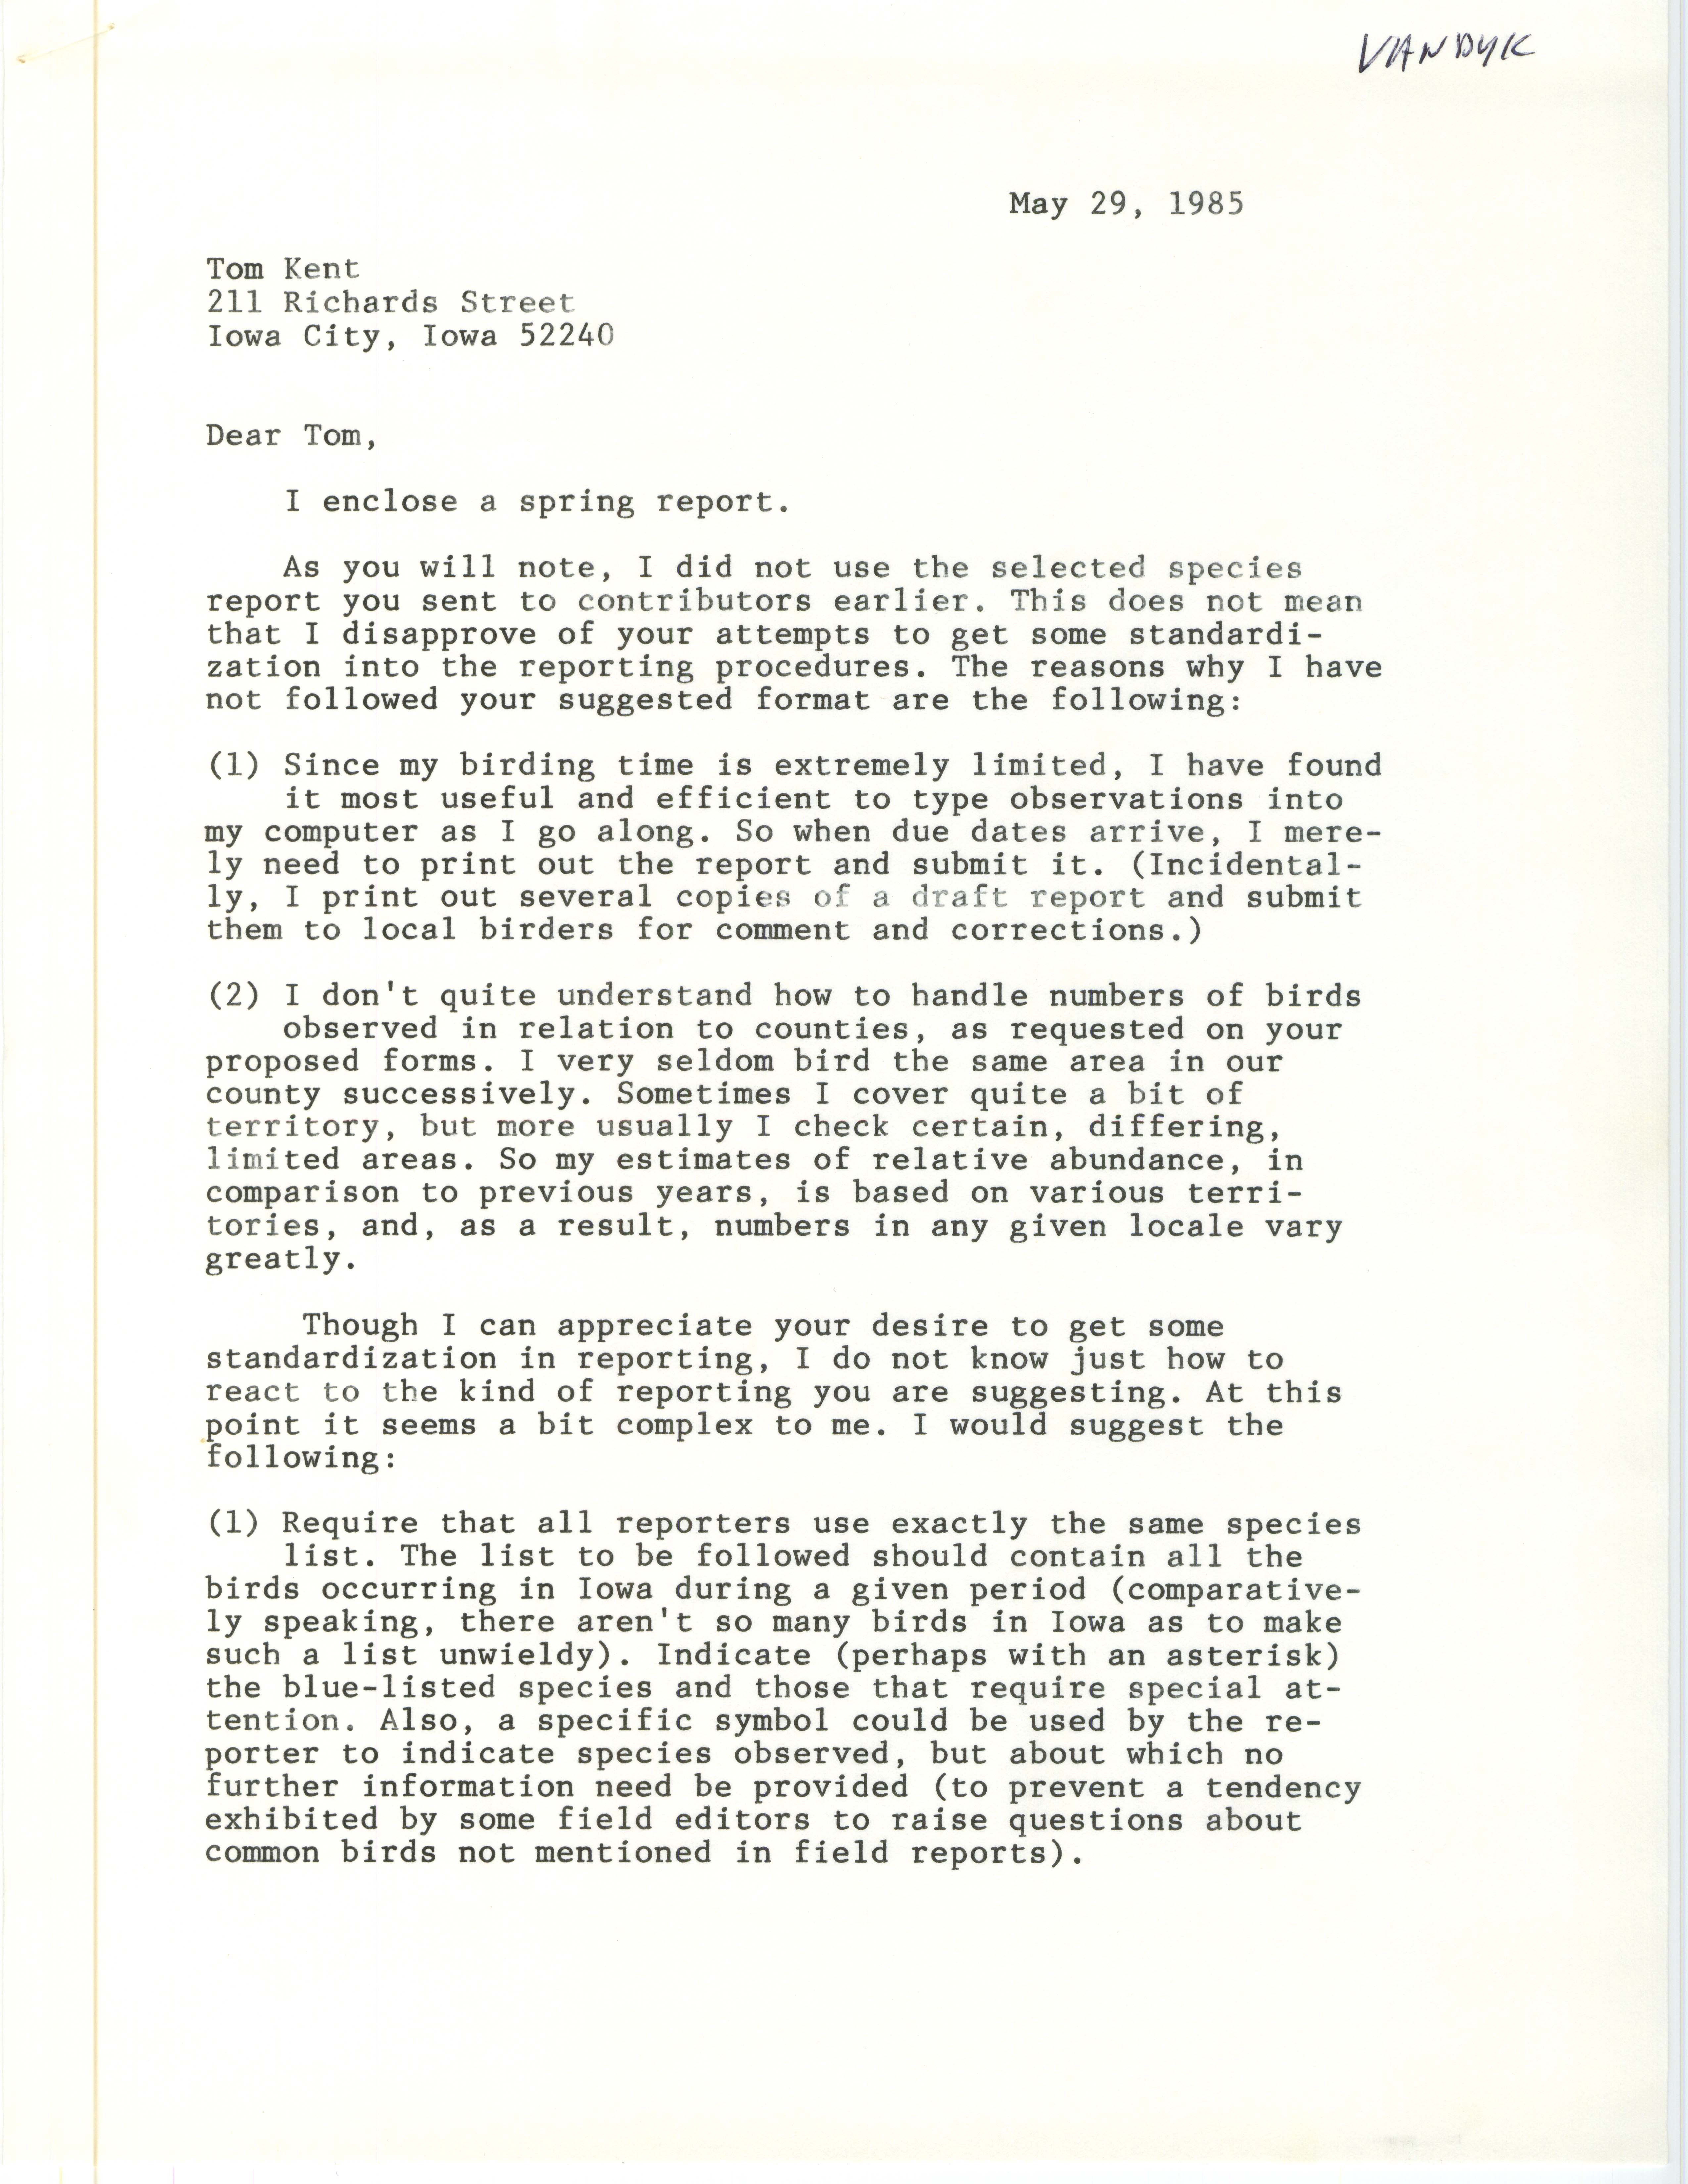 John Van Dyk letter to Thomas H. Kent regarding field report standardization, May 29, 1985, with accompanying field notes